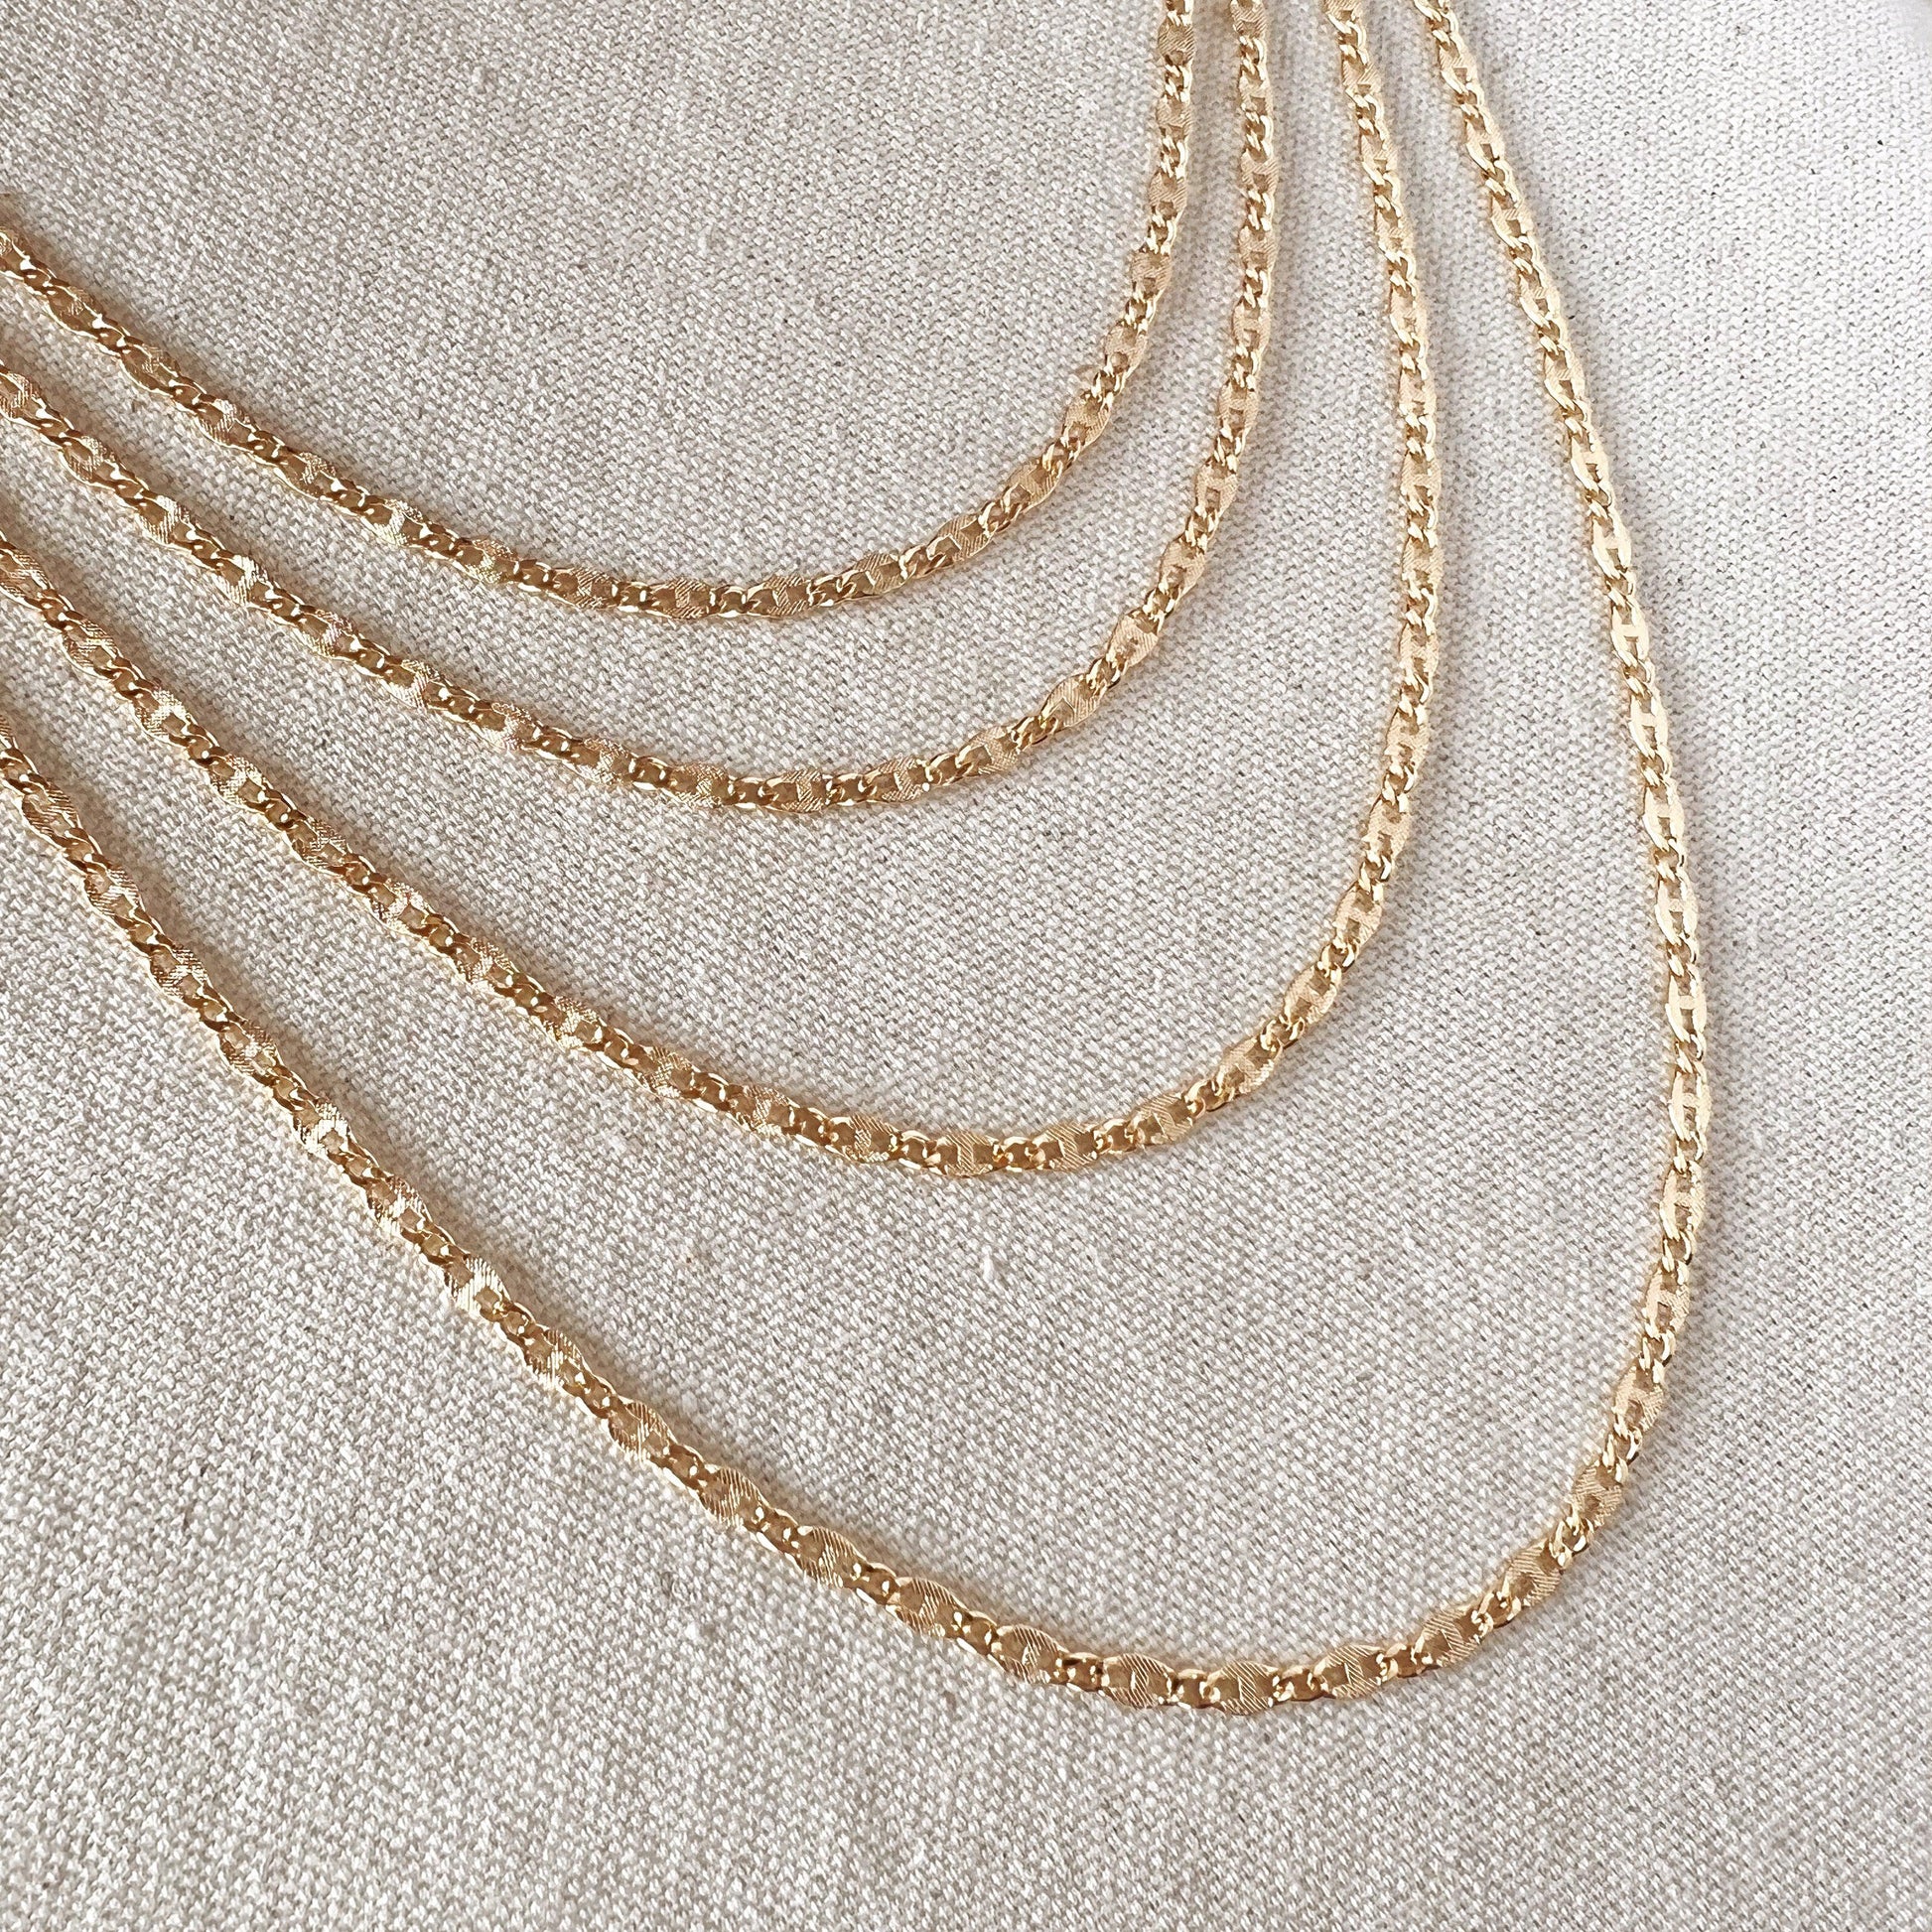 GoldFi 18k Gold Filled Detailed Chain Jewelry